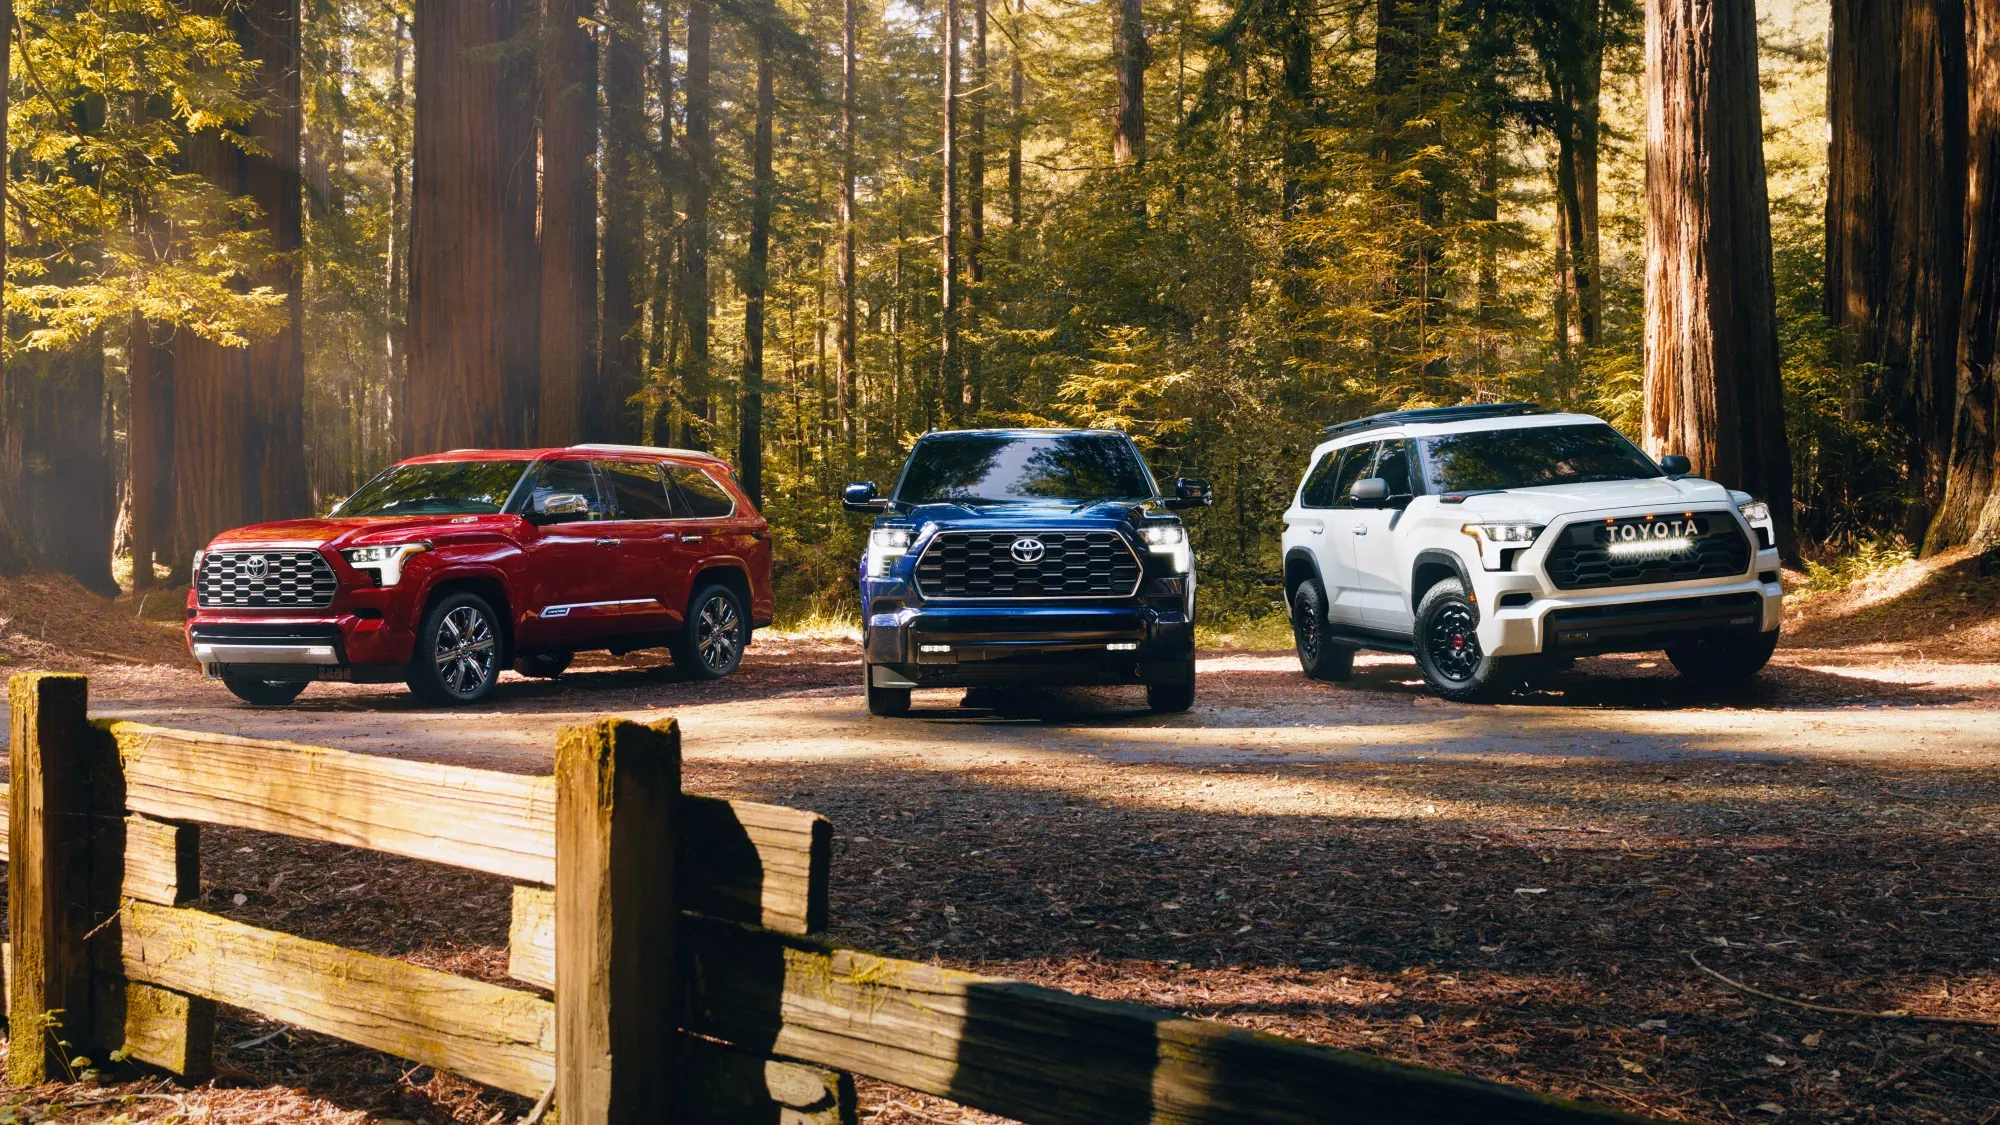 3 DIfferent trims of the 2023 Toyota Sequoia (Red, Blue & White) - Front